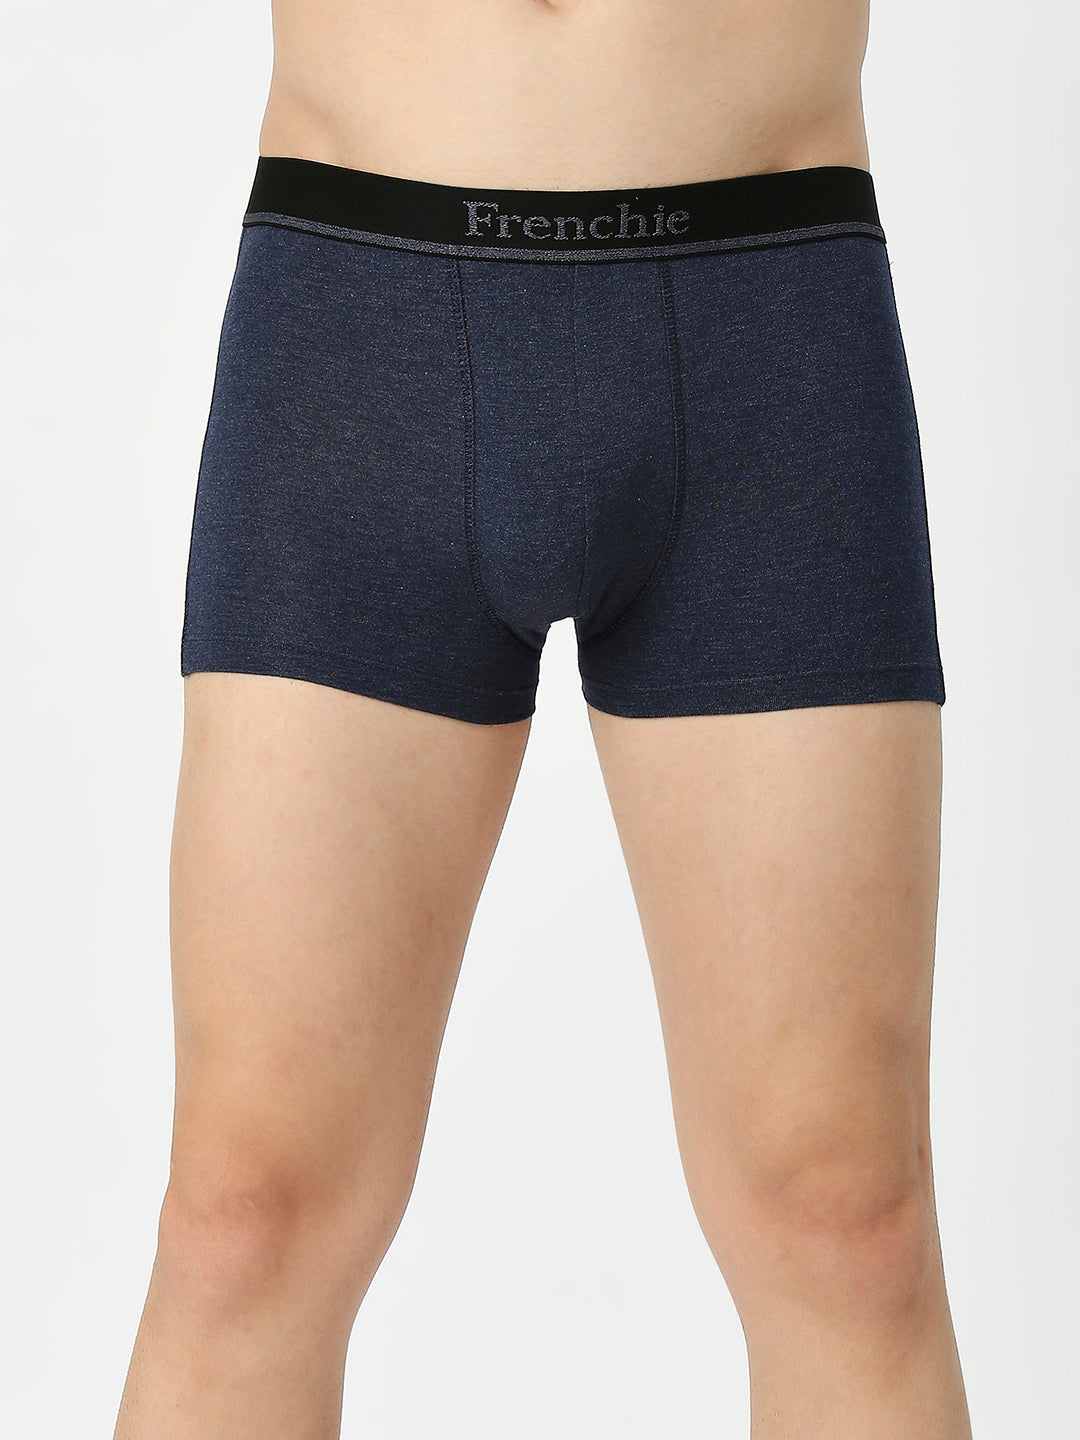 Buy VIP Frenchie Innerwear Collection Online